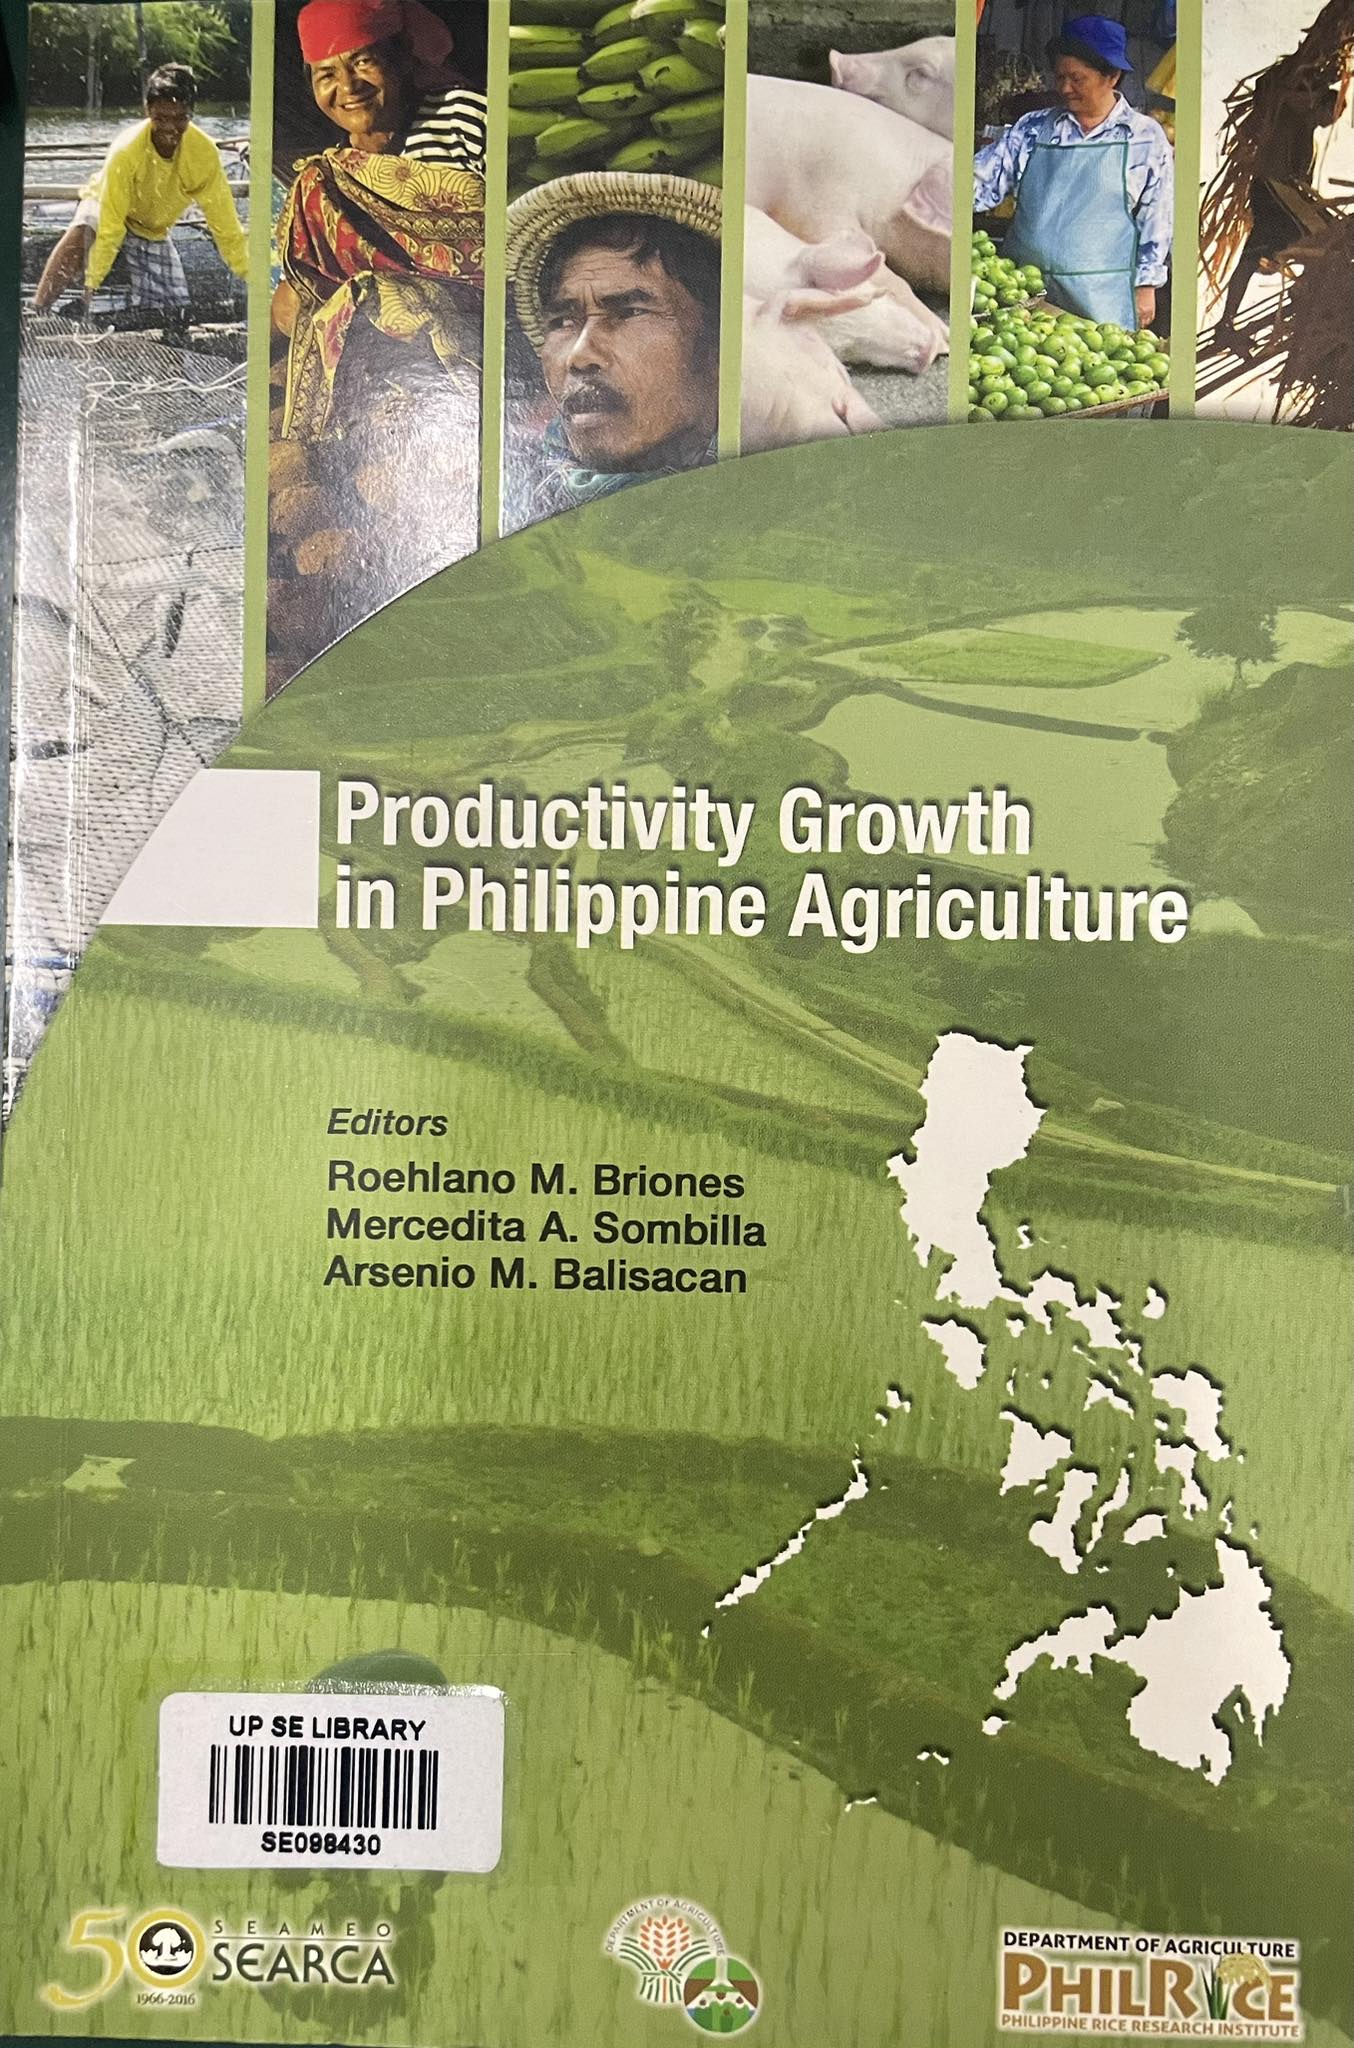 Productivity growth in Philippine agriculture